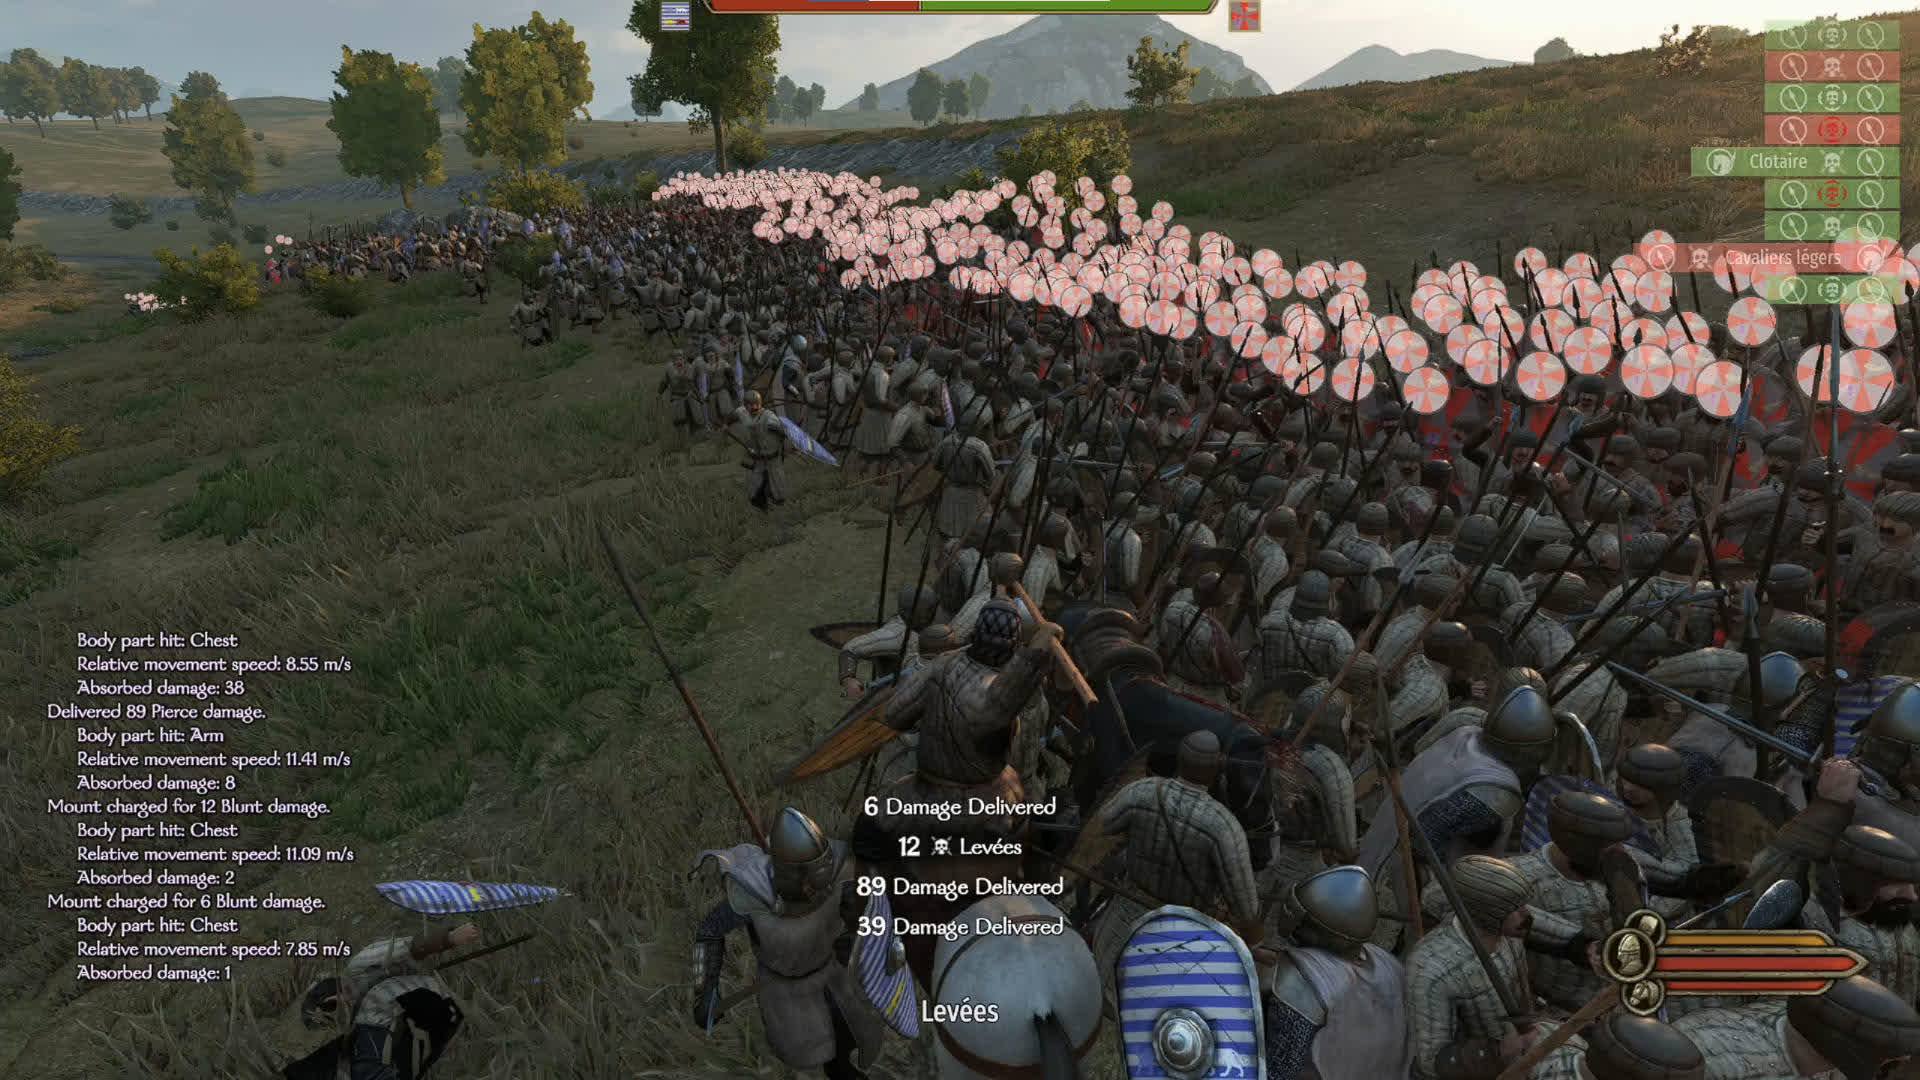 Crusader Blade is a mod that uses Mount & Blade II to fight Crusader Kings III battles